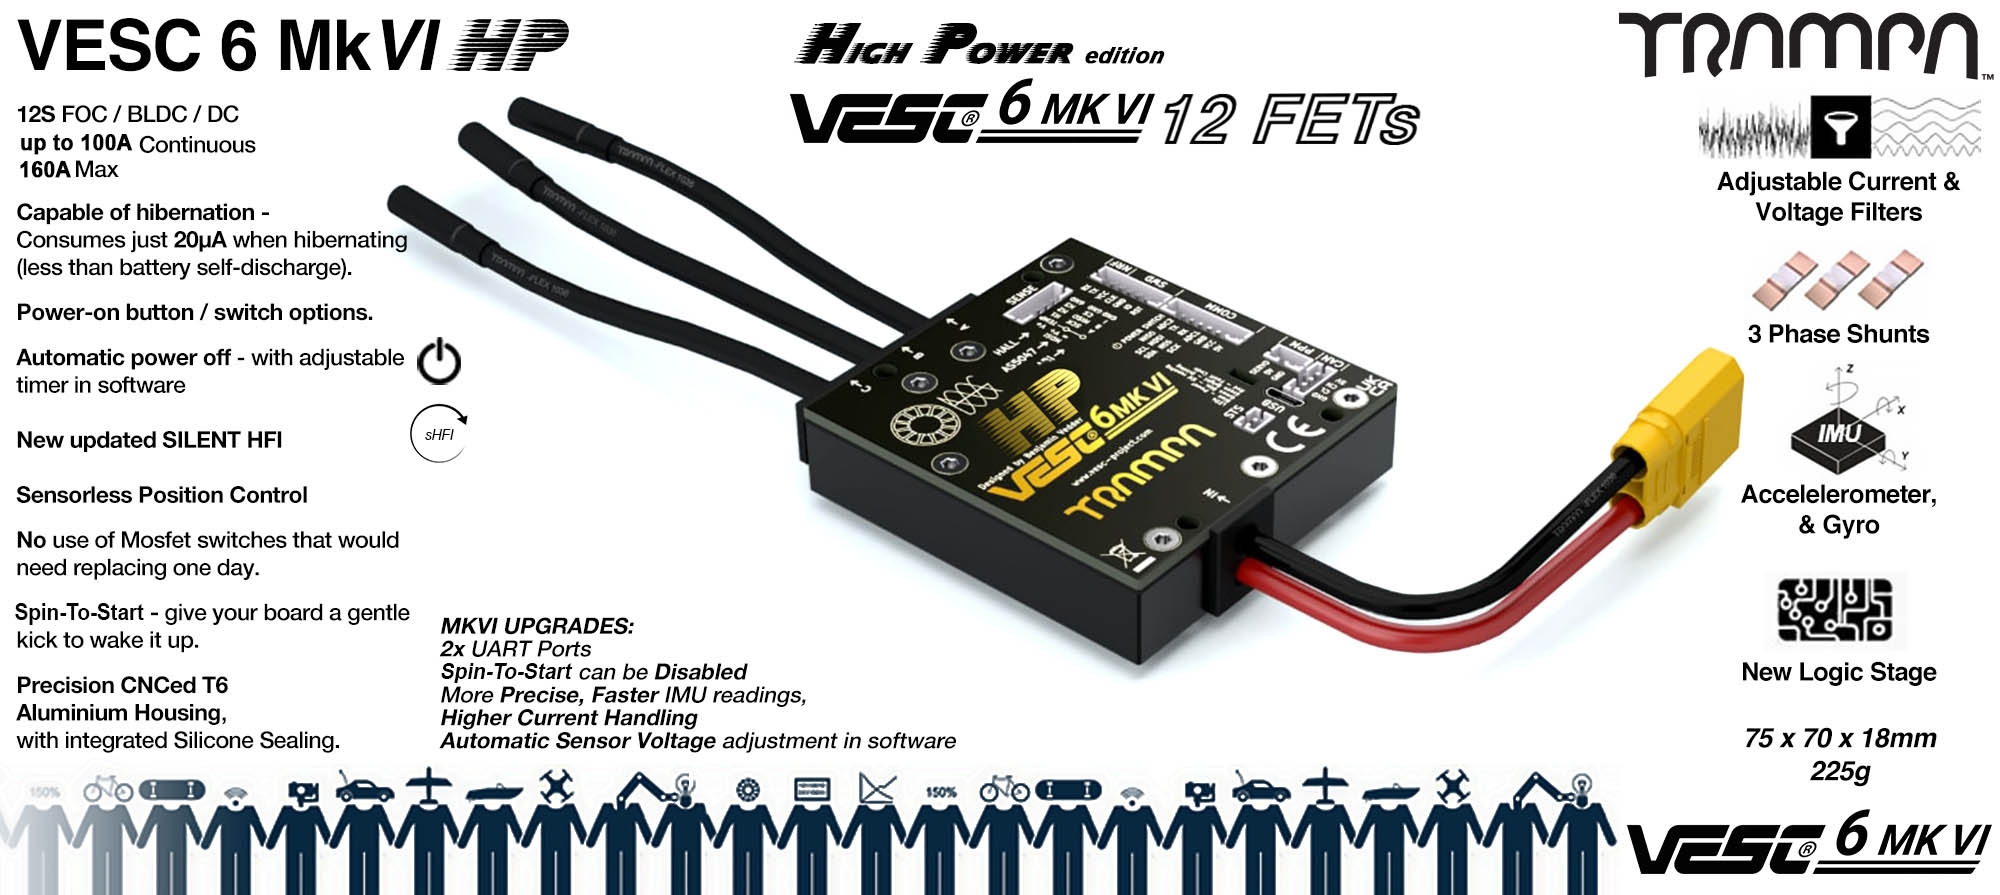 VESC 6 HP - HIGH POWER PCB - The next generation - Benjamin Vedder Electronic Speed Controller